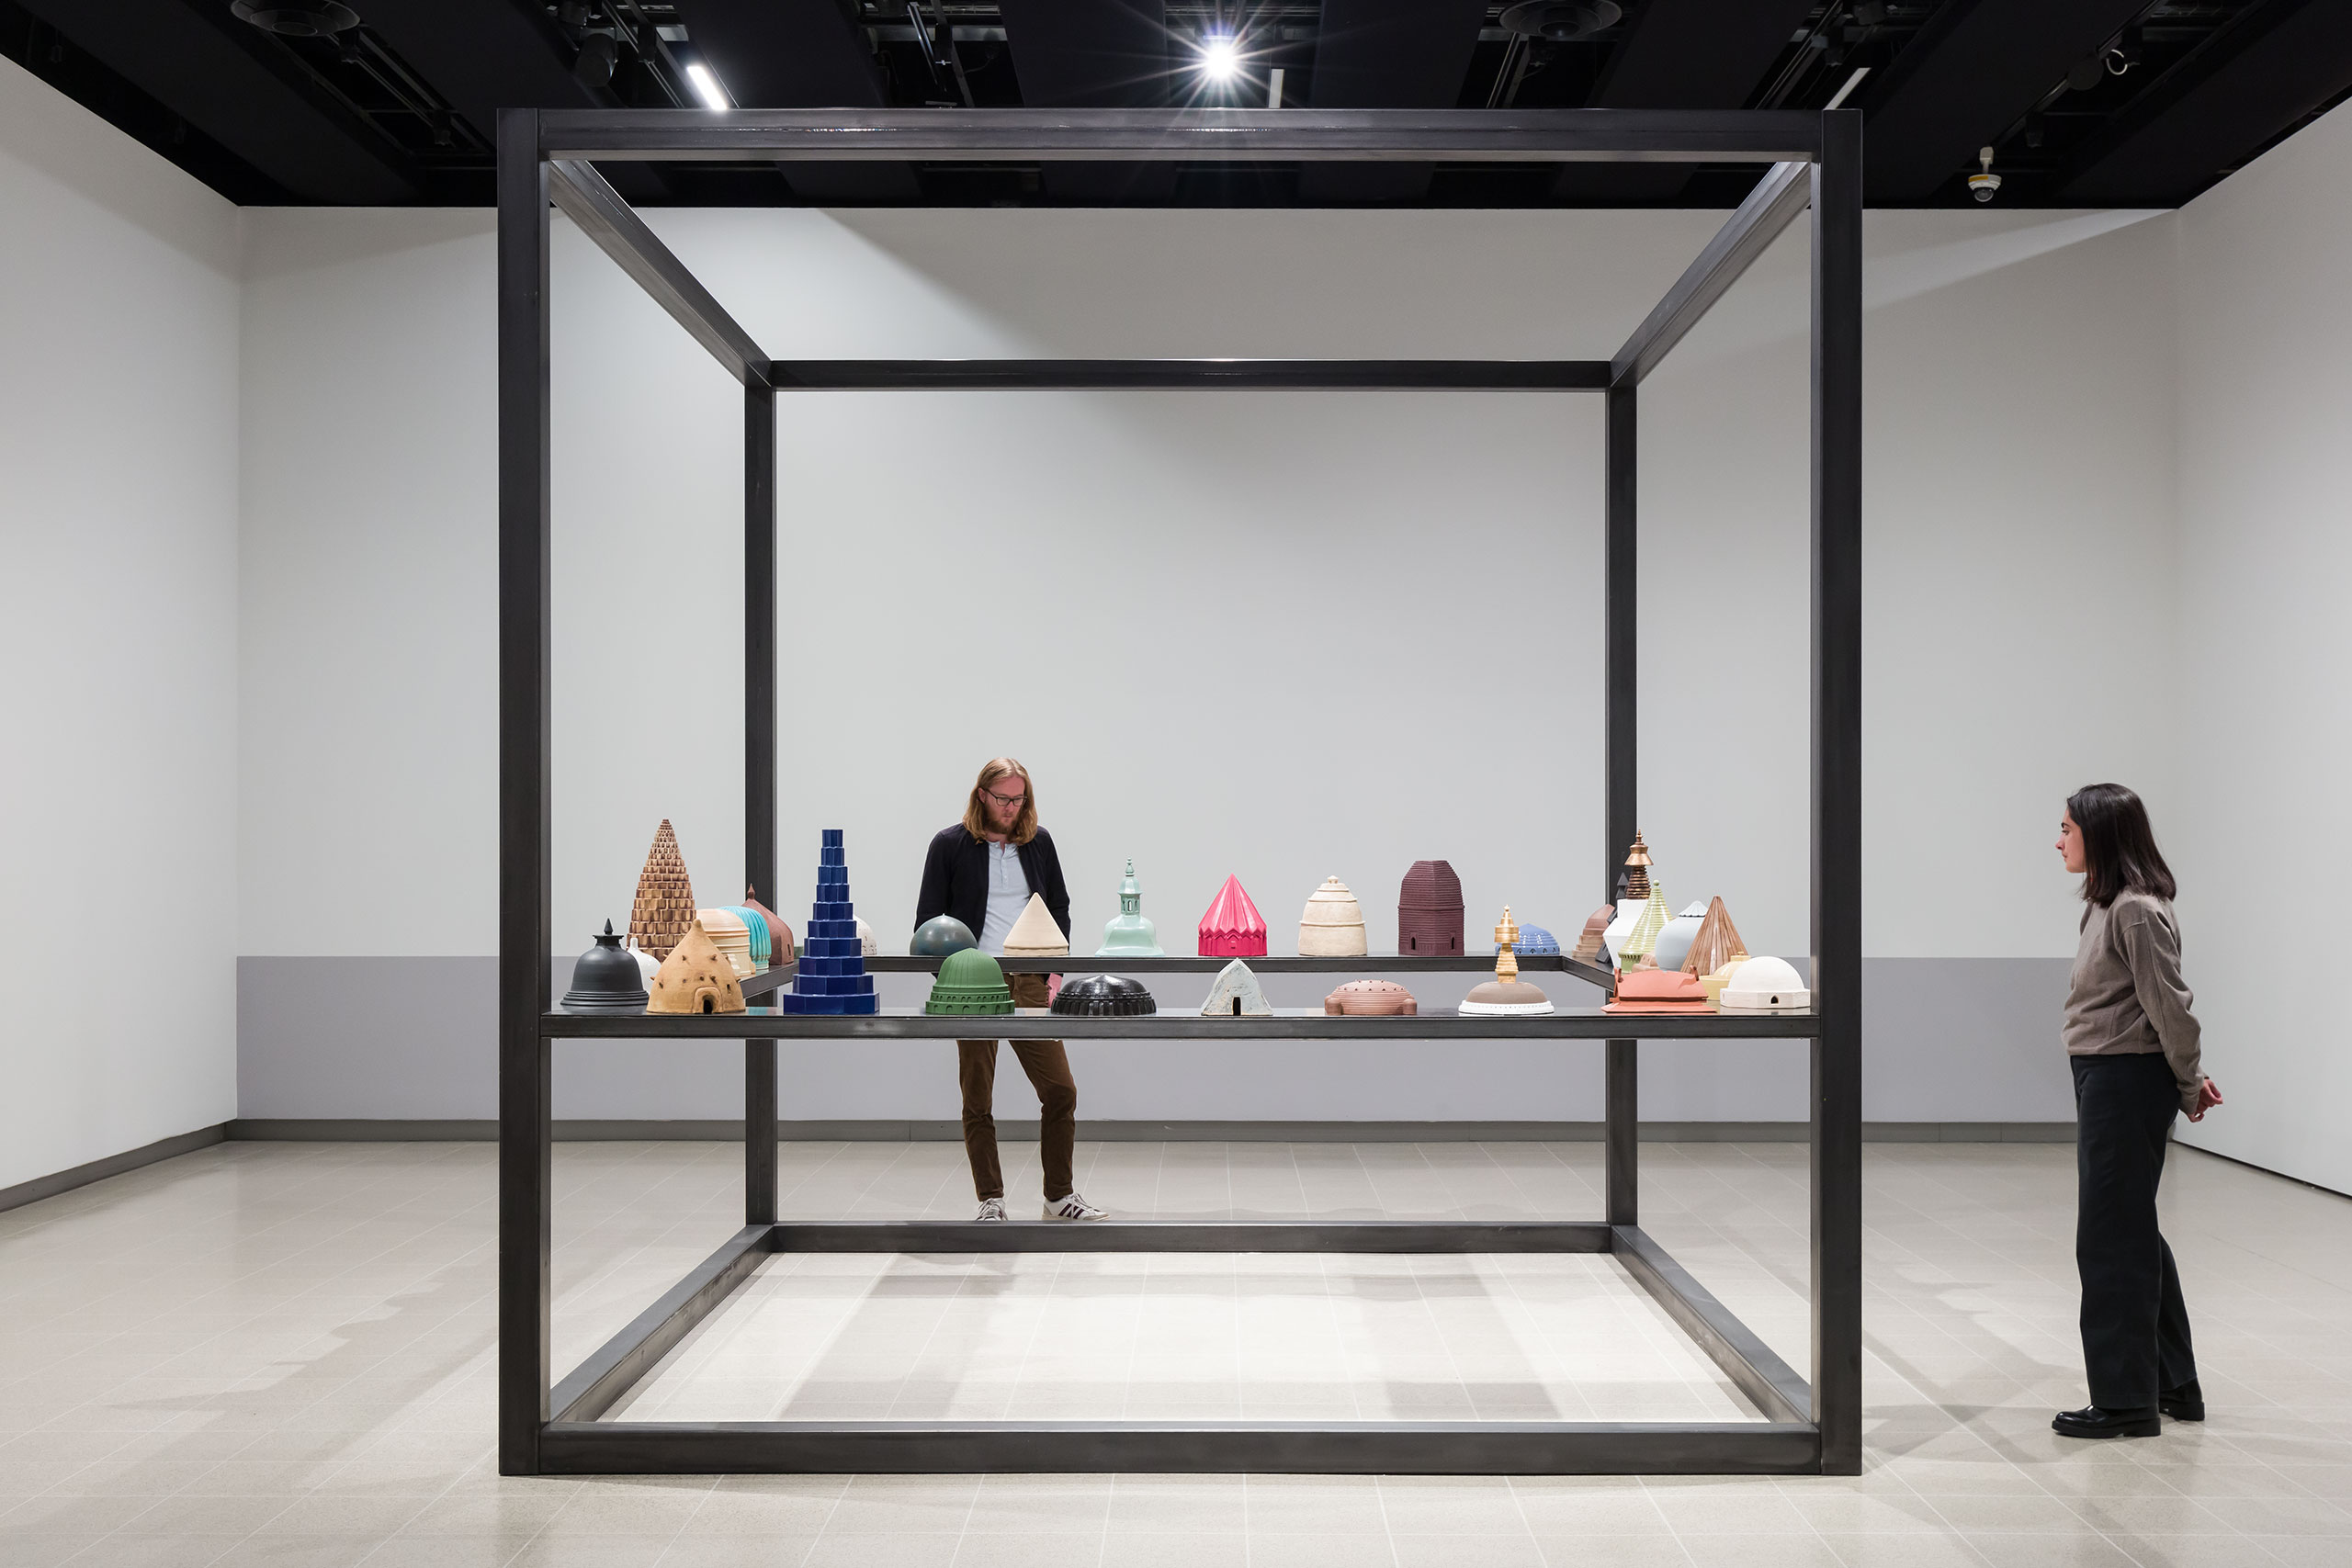 Installation view of Shahpour Pouyan, Strange Clay: Ceramics in Contemporary Art at the Hayward Gallery (26 October 2022 - 8 January 2023). Photo: Mark Blower. Courtesy the Hayward Gallery.